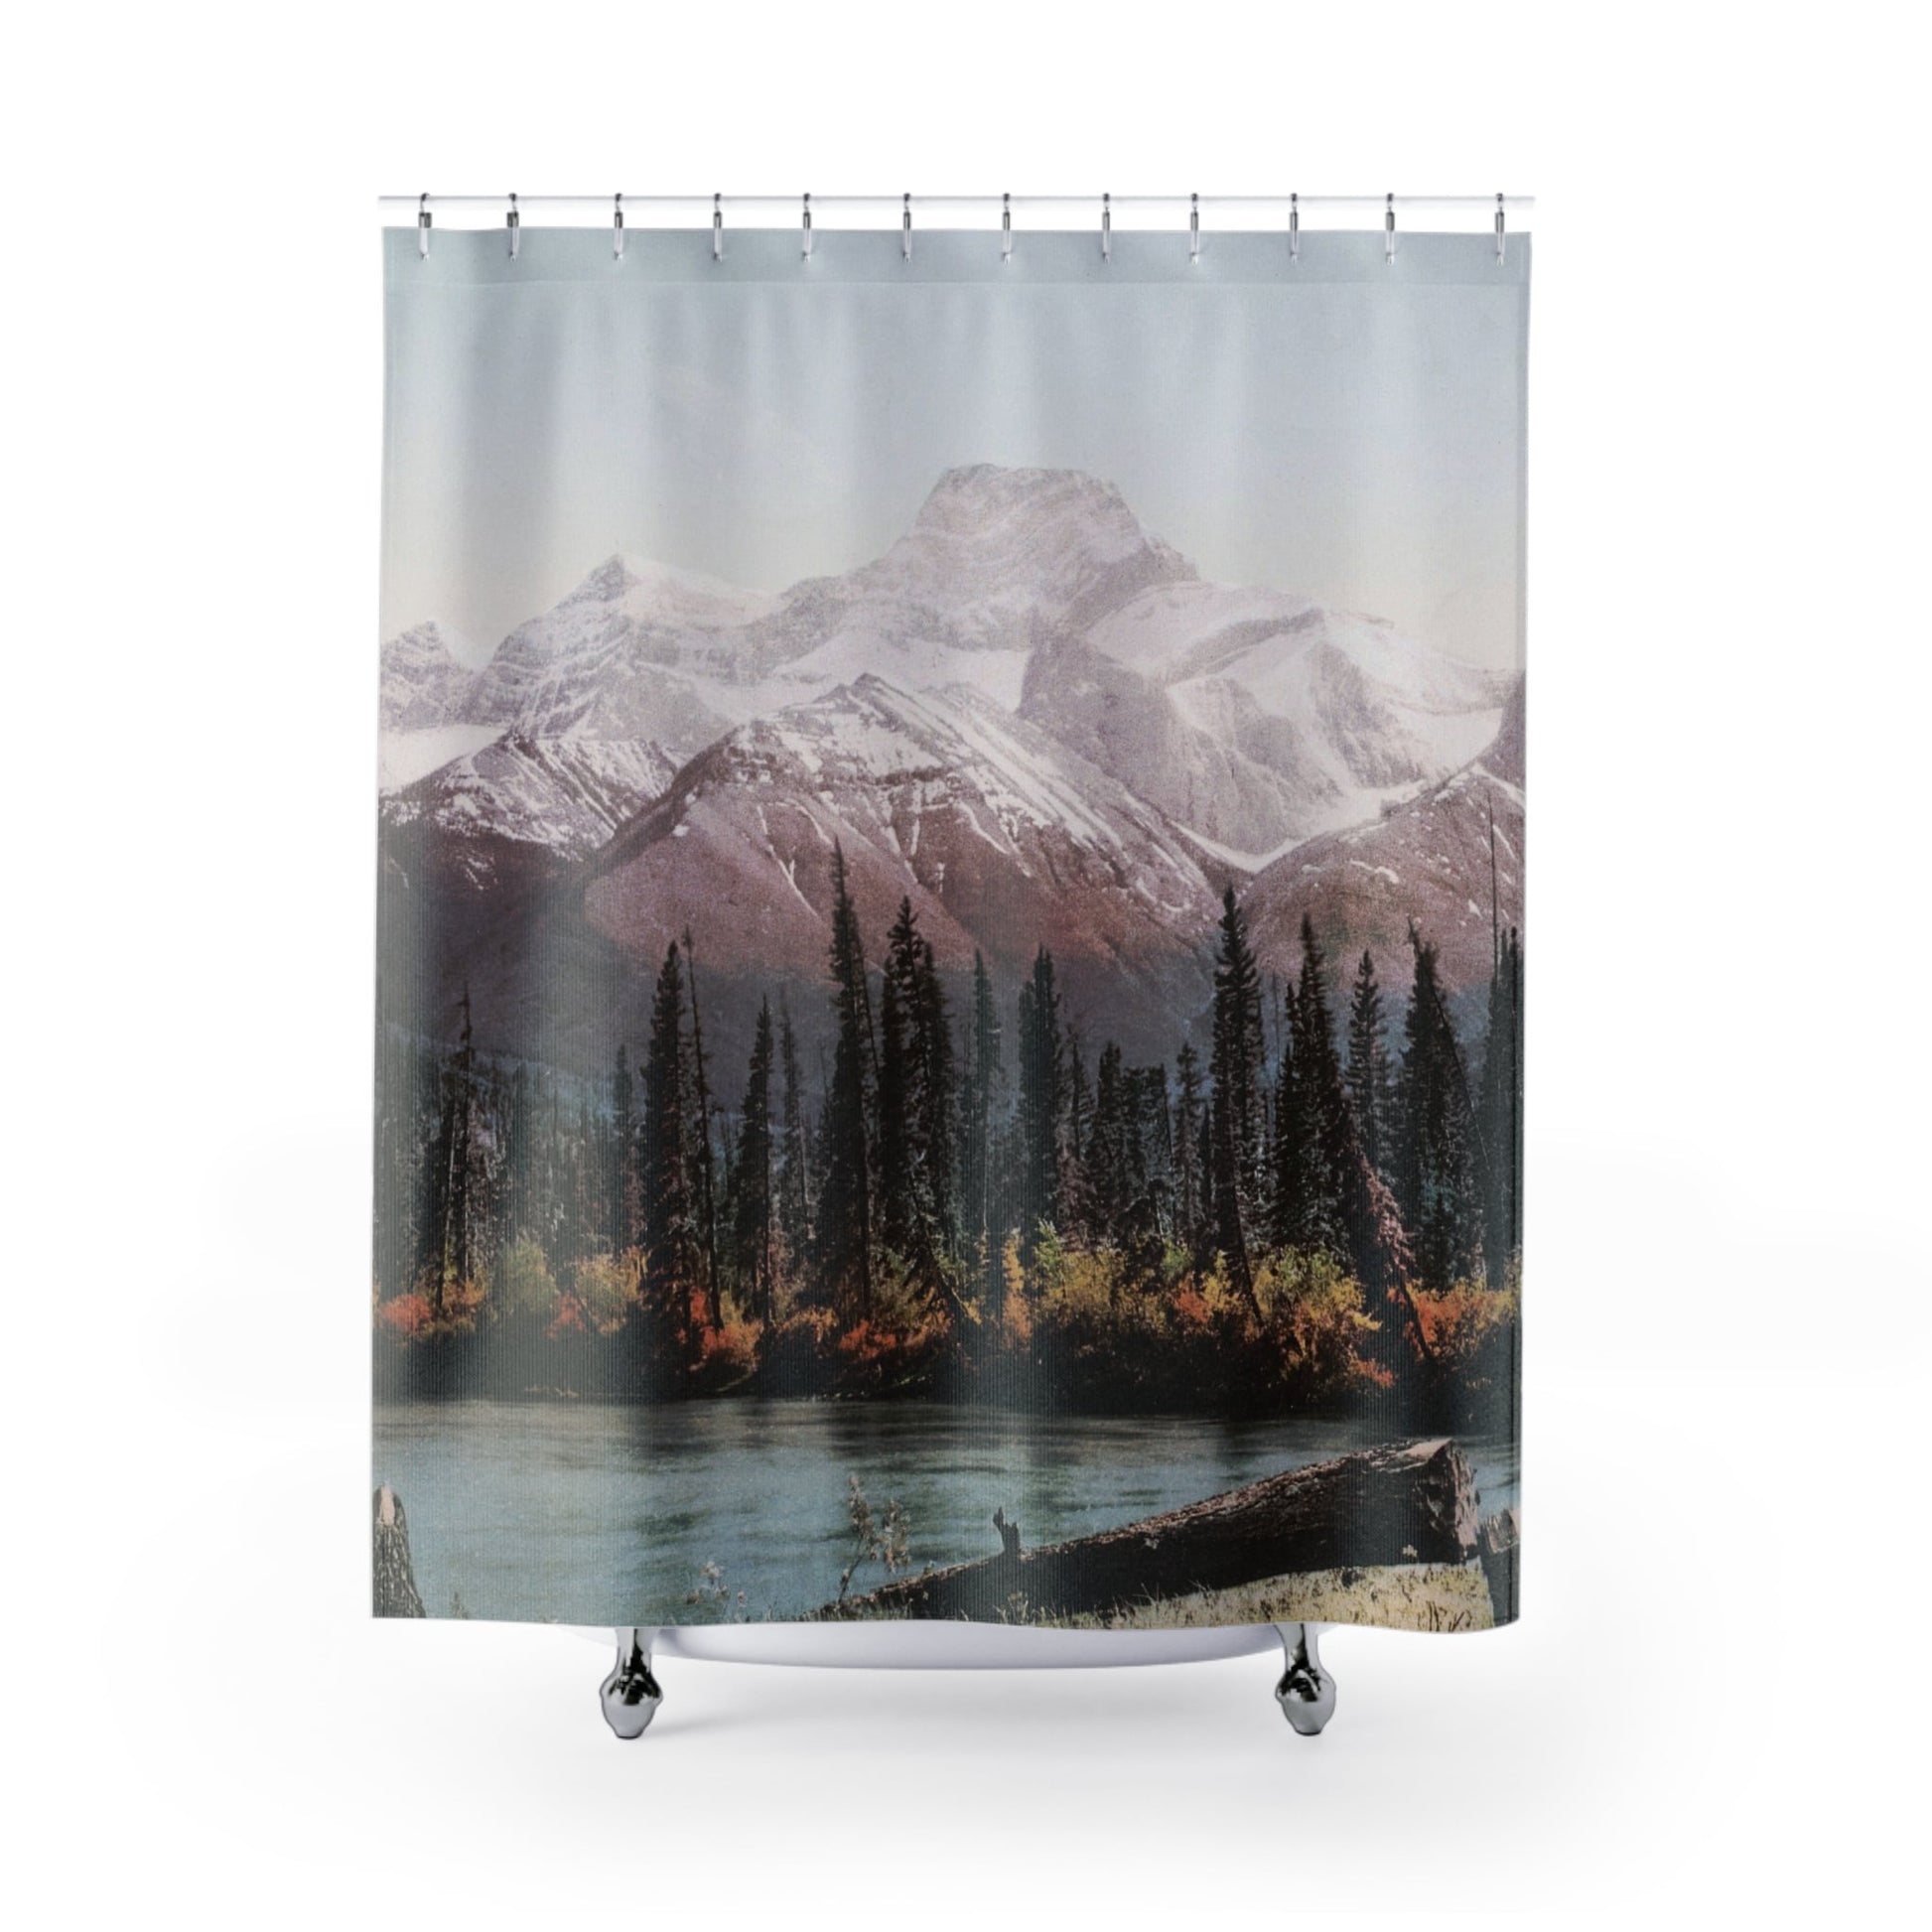 Beautiful Mountain Shower Curtain with mountains and lakes design, scenic bathroom decor showcasing picturesque nature views.